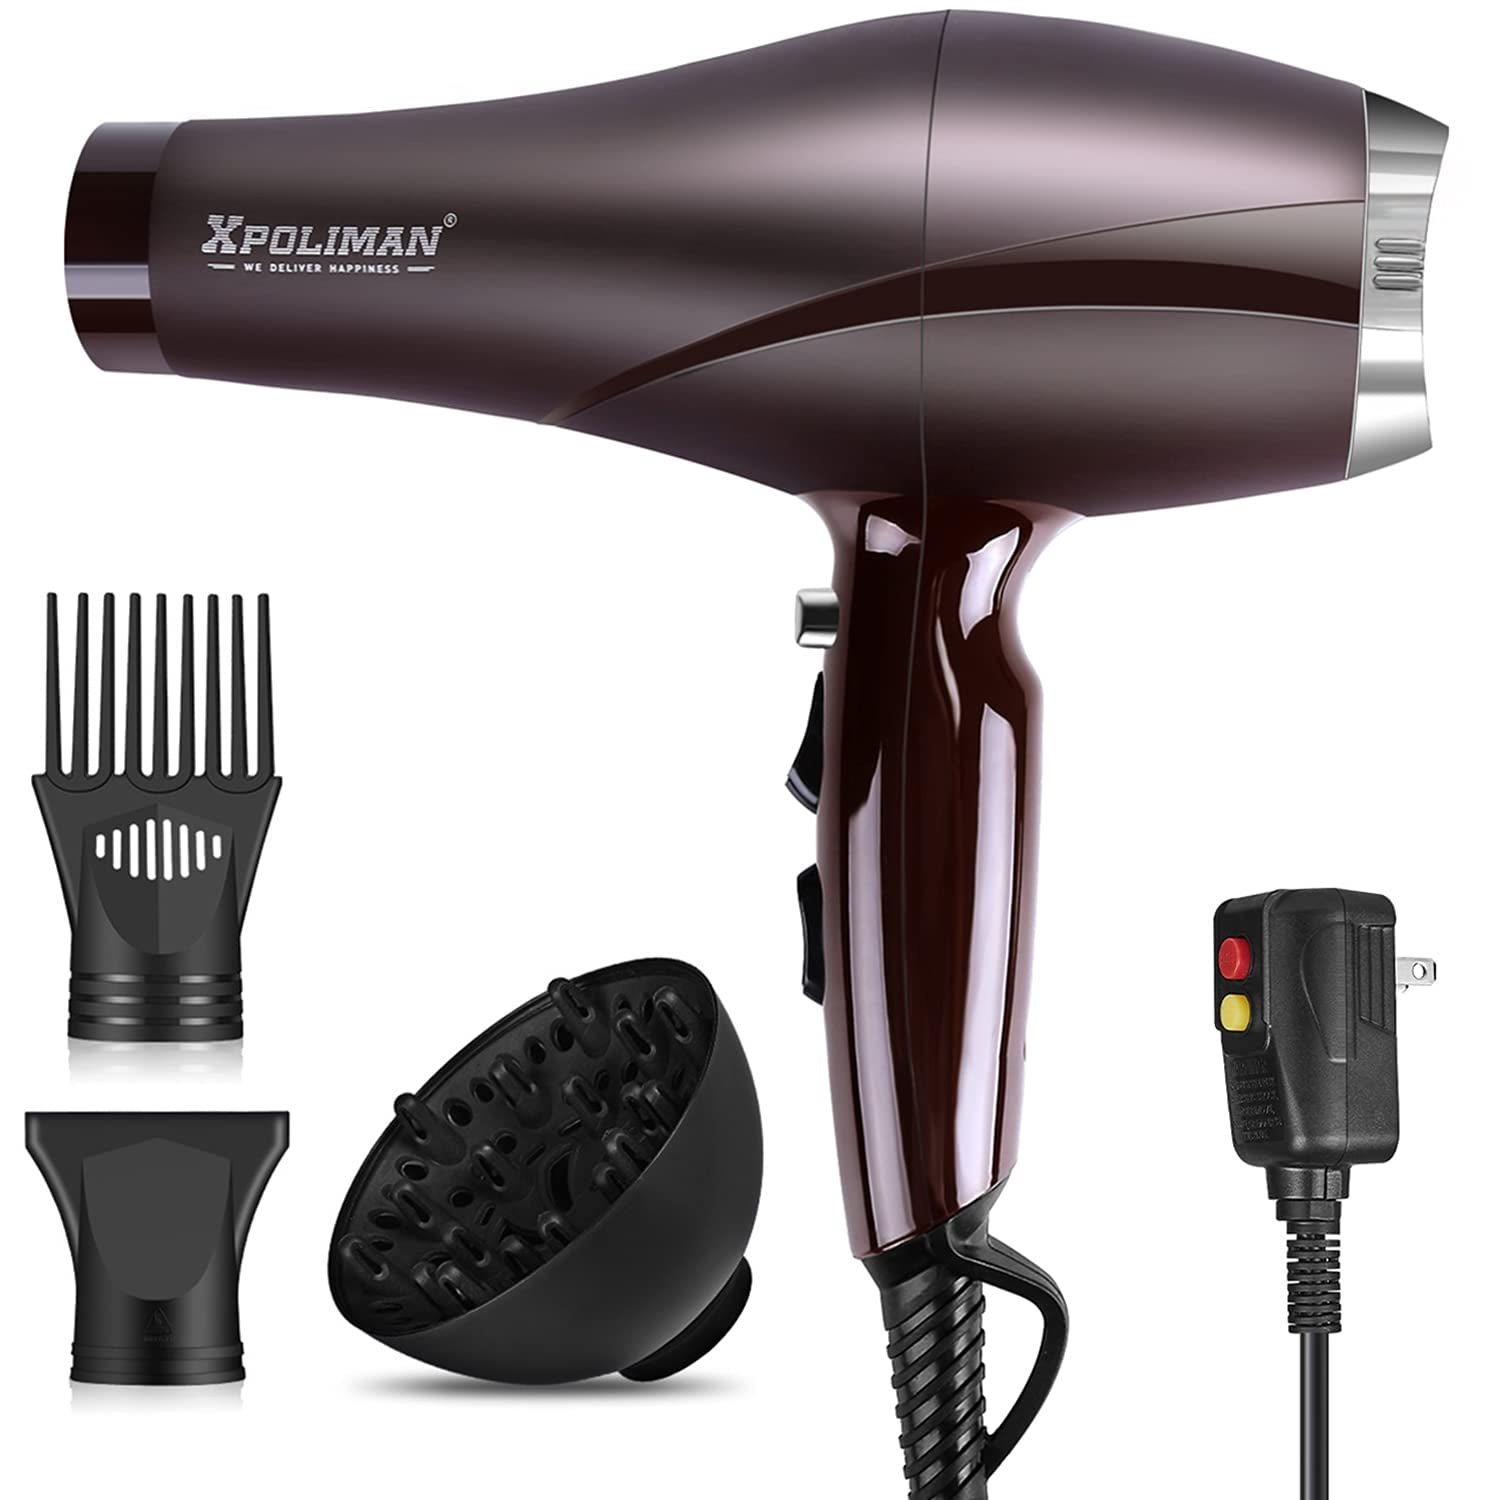 Hair Dryer with cool air 1600W (PPH2600) - PowerPacSG